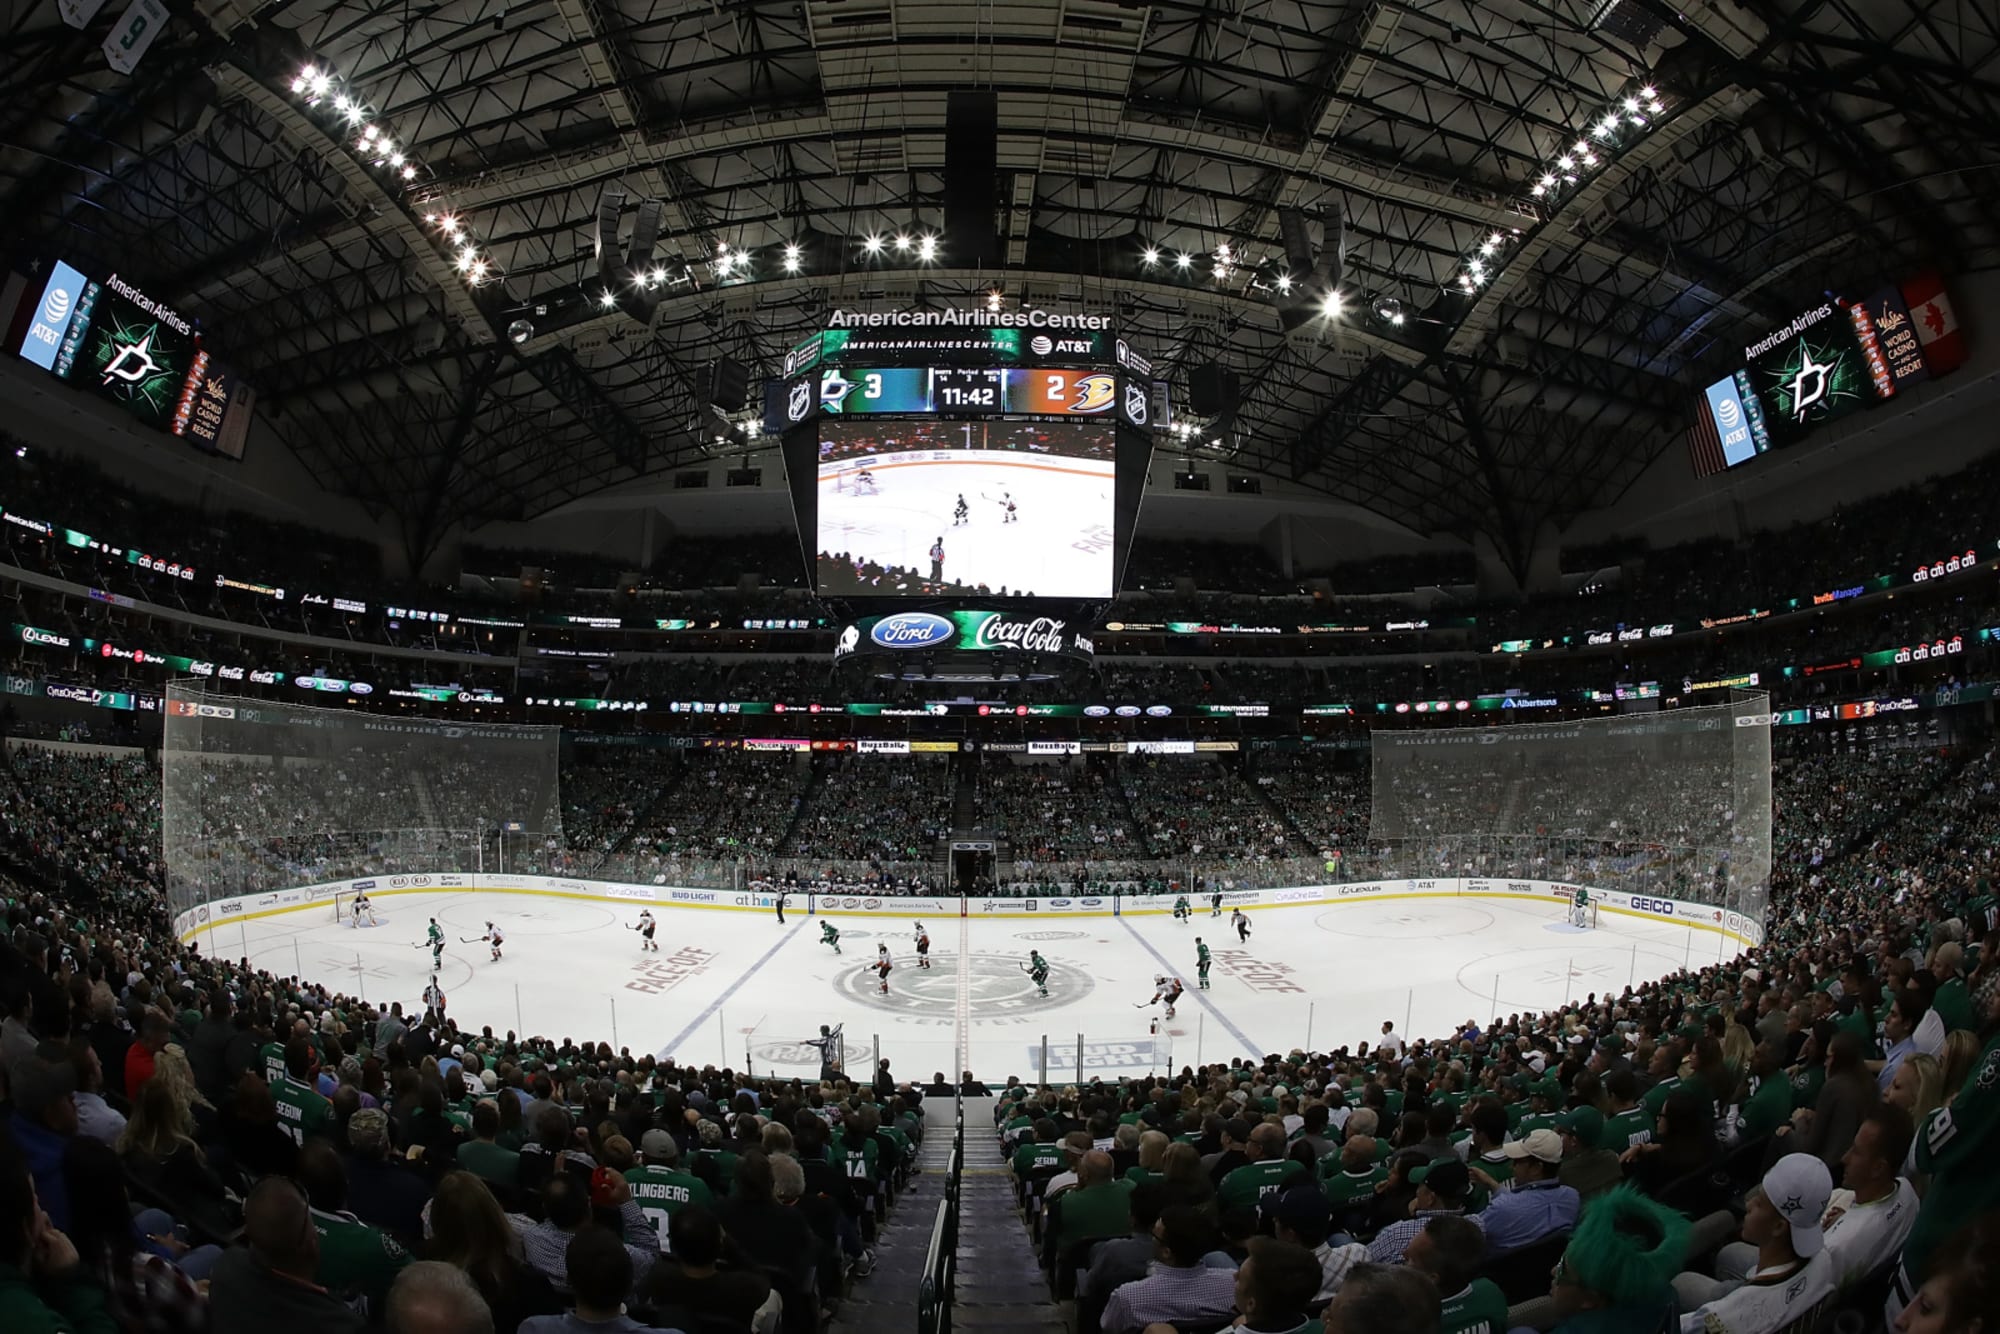 Dallas Stars release 2018-19 Training Camp Roster and Schedule